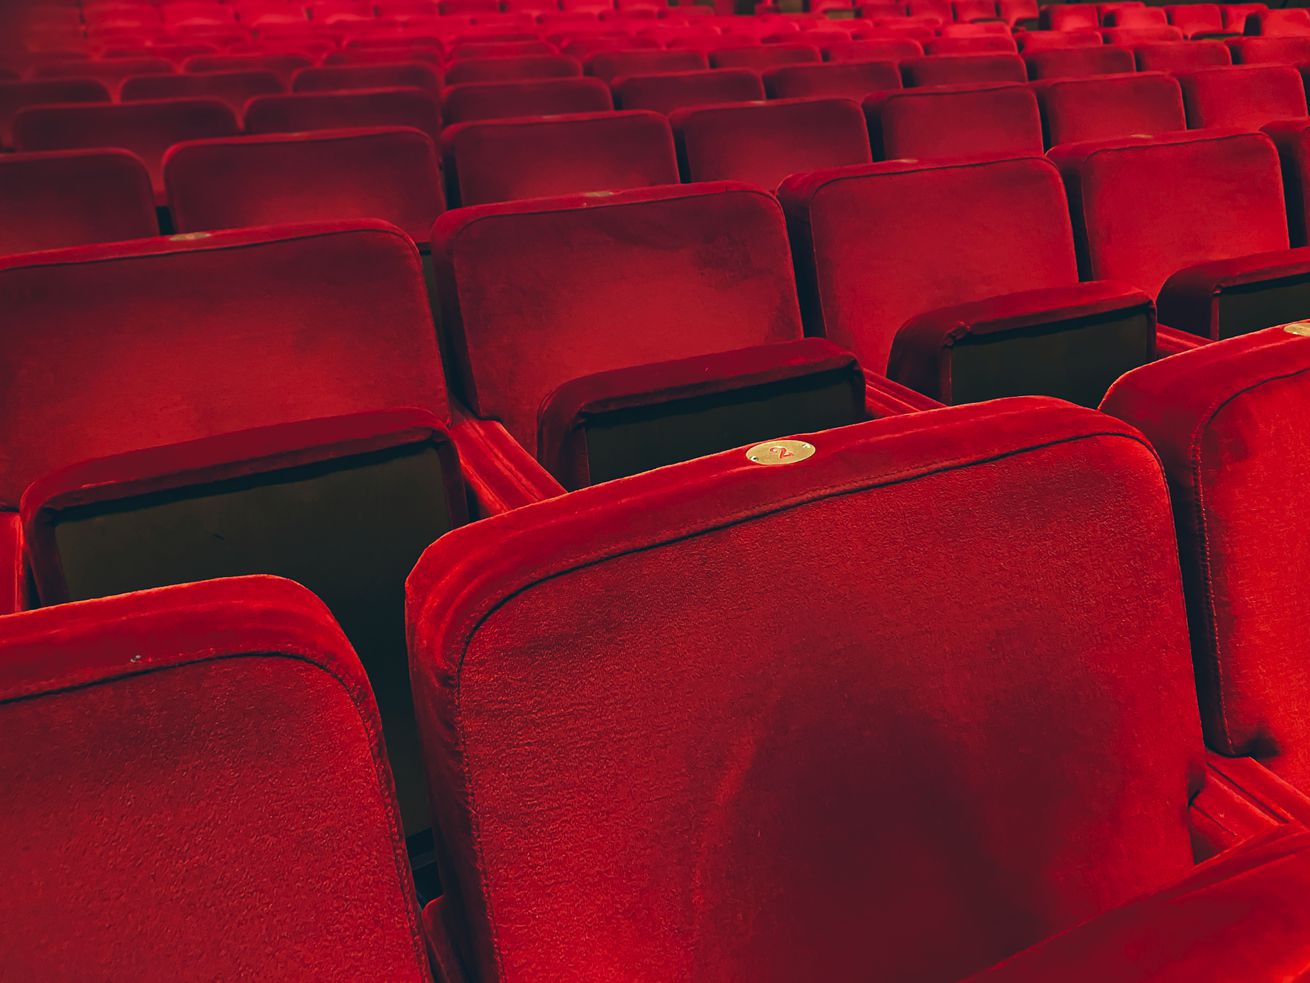 Why movie tickets will be $3 across America this Saturday